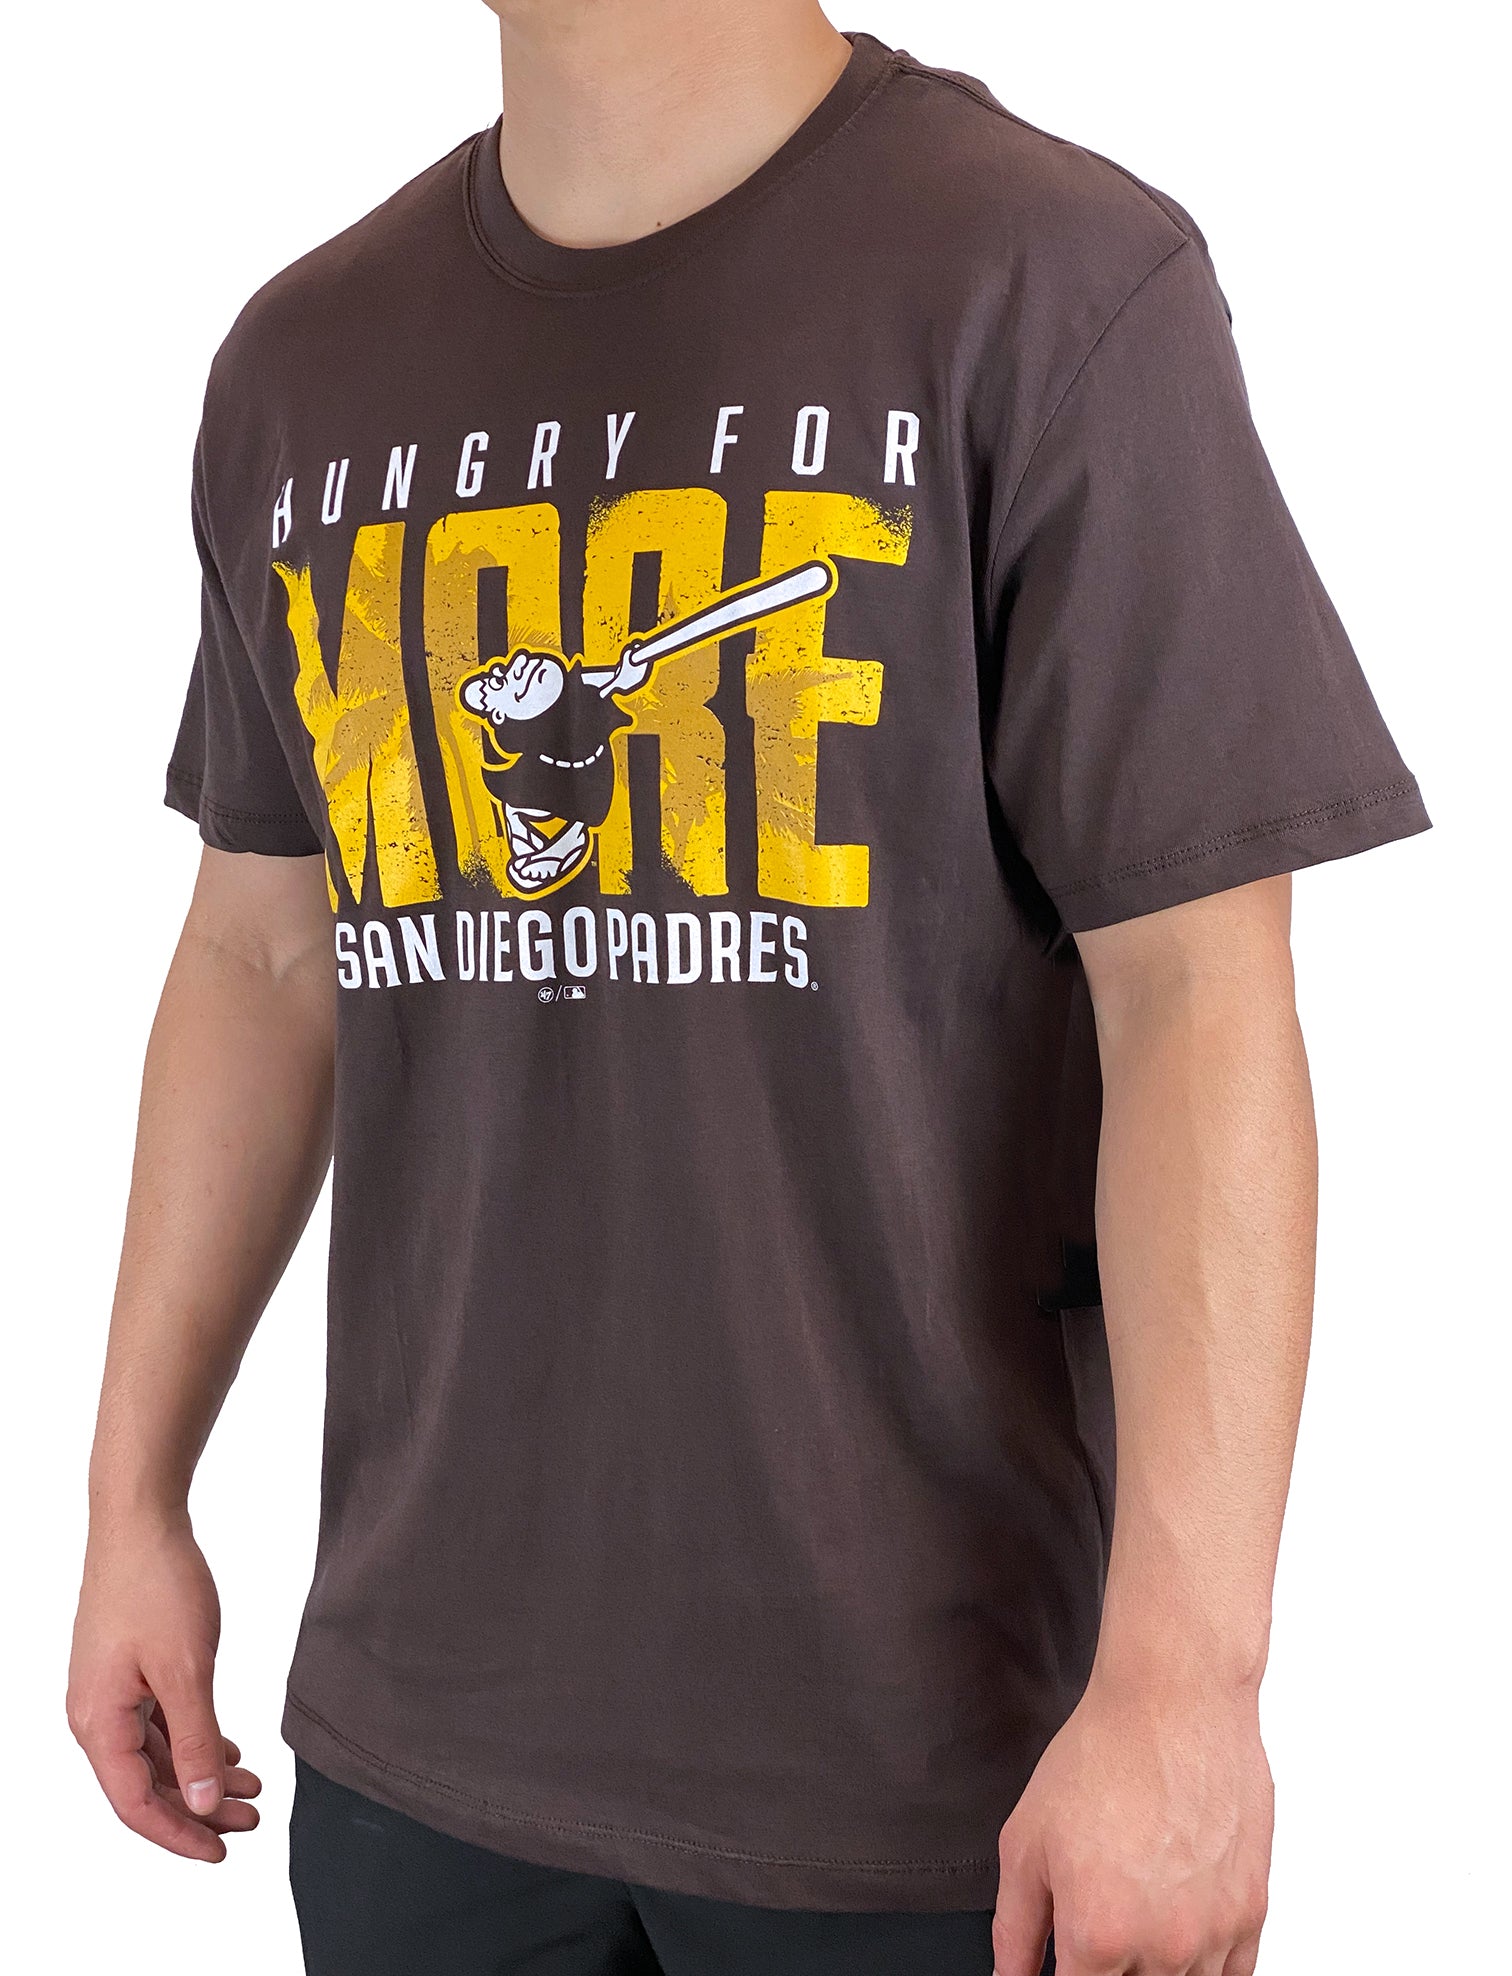 Men's San Diego Padres Gear, Mens Padres Apparel, Guys Clothes